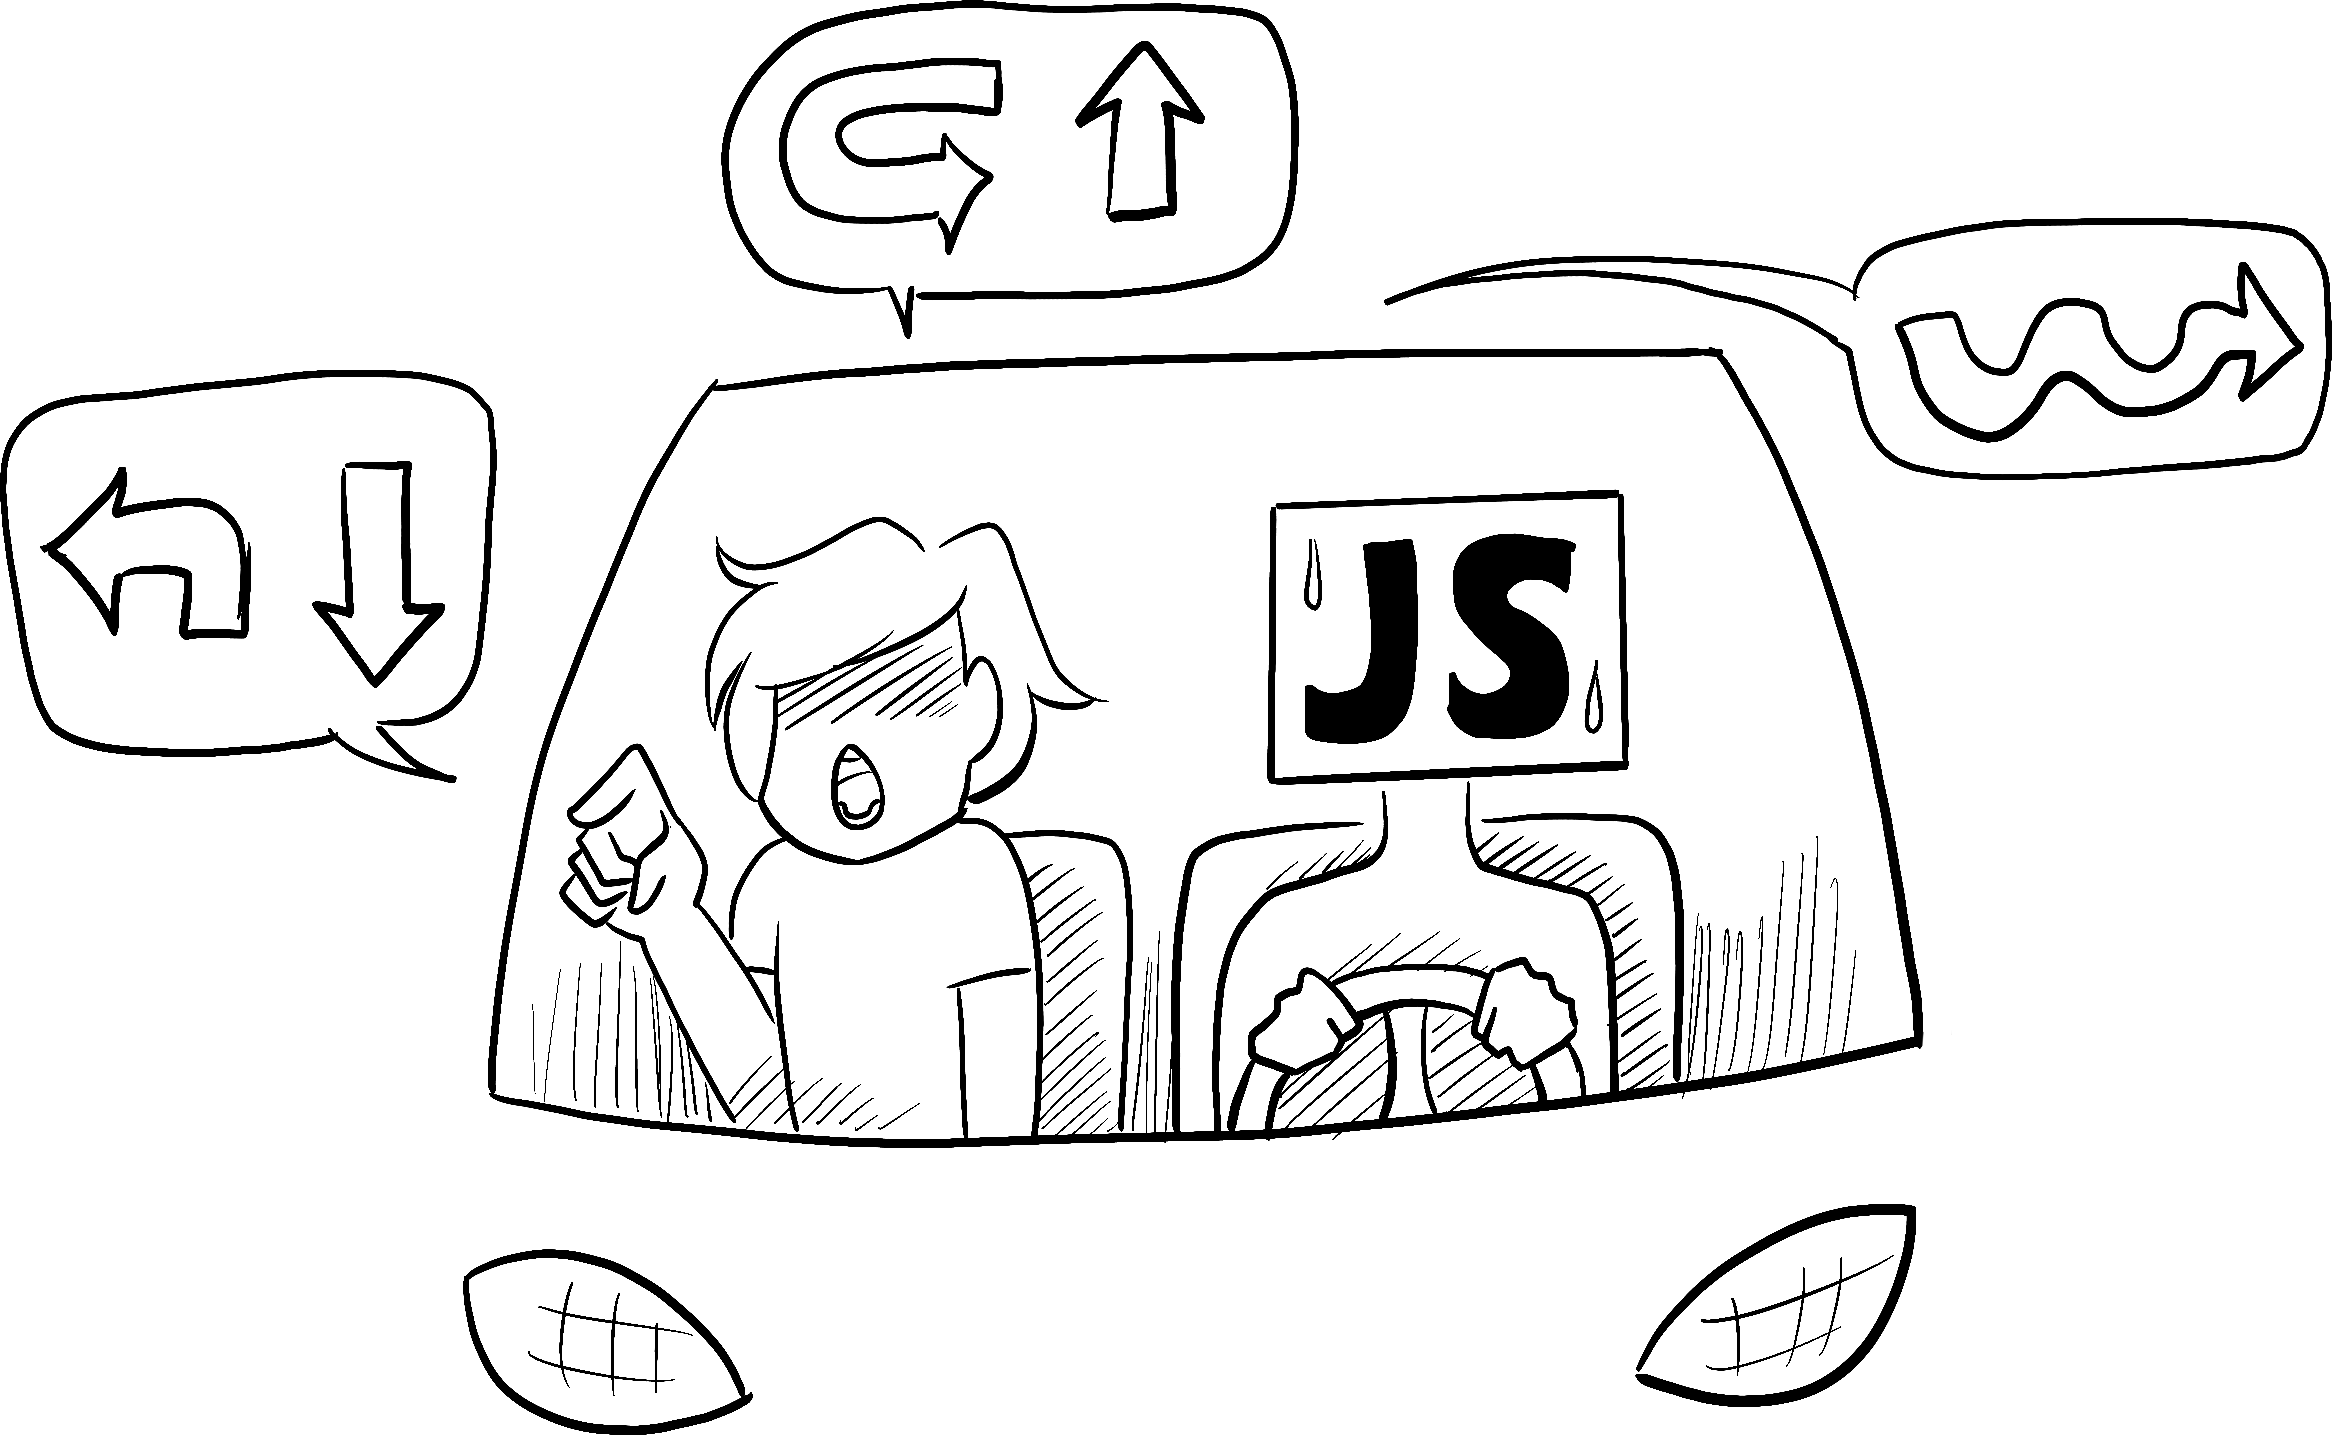 In a car driven by an anxious-looking person representing JavaScript, a passenger orders the driver to execute a sequence of complicated turn by turn navigations.